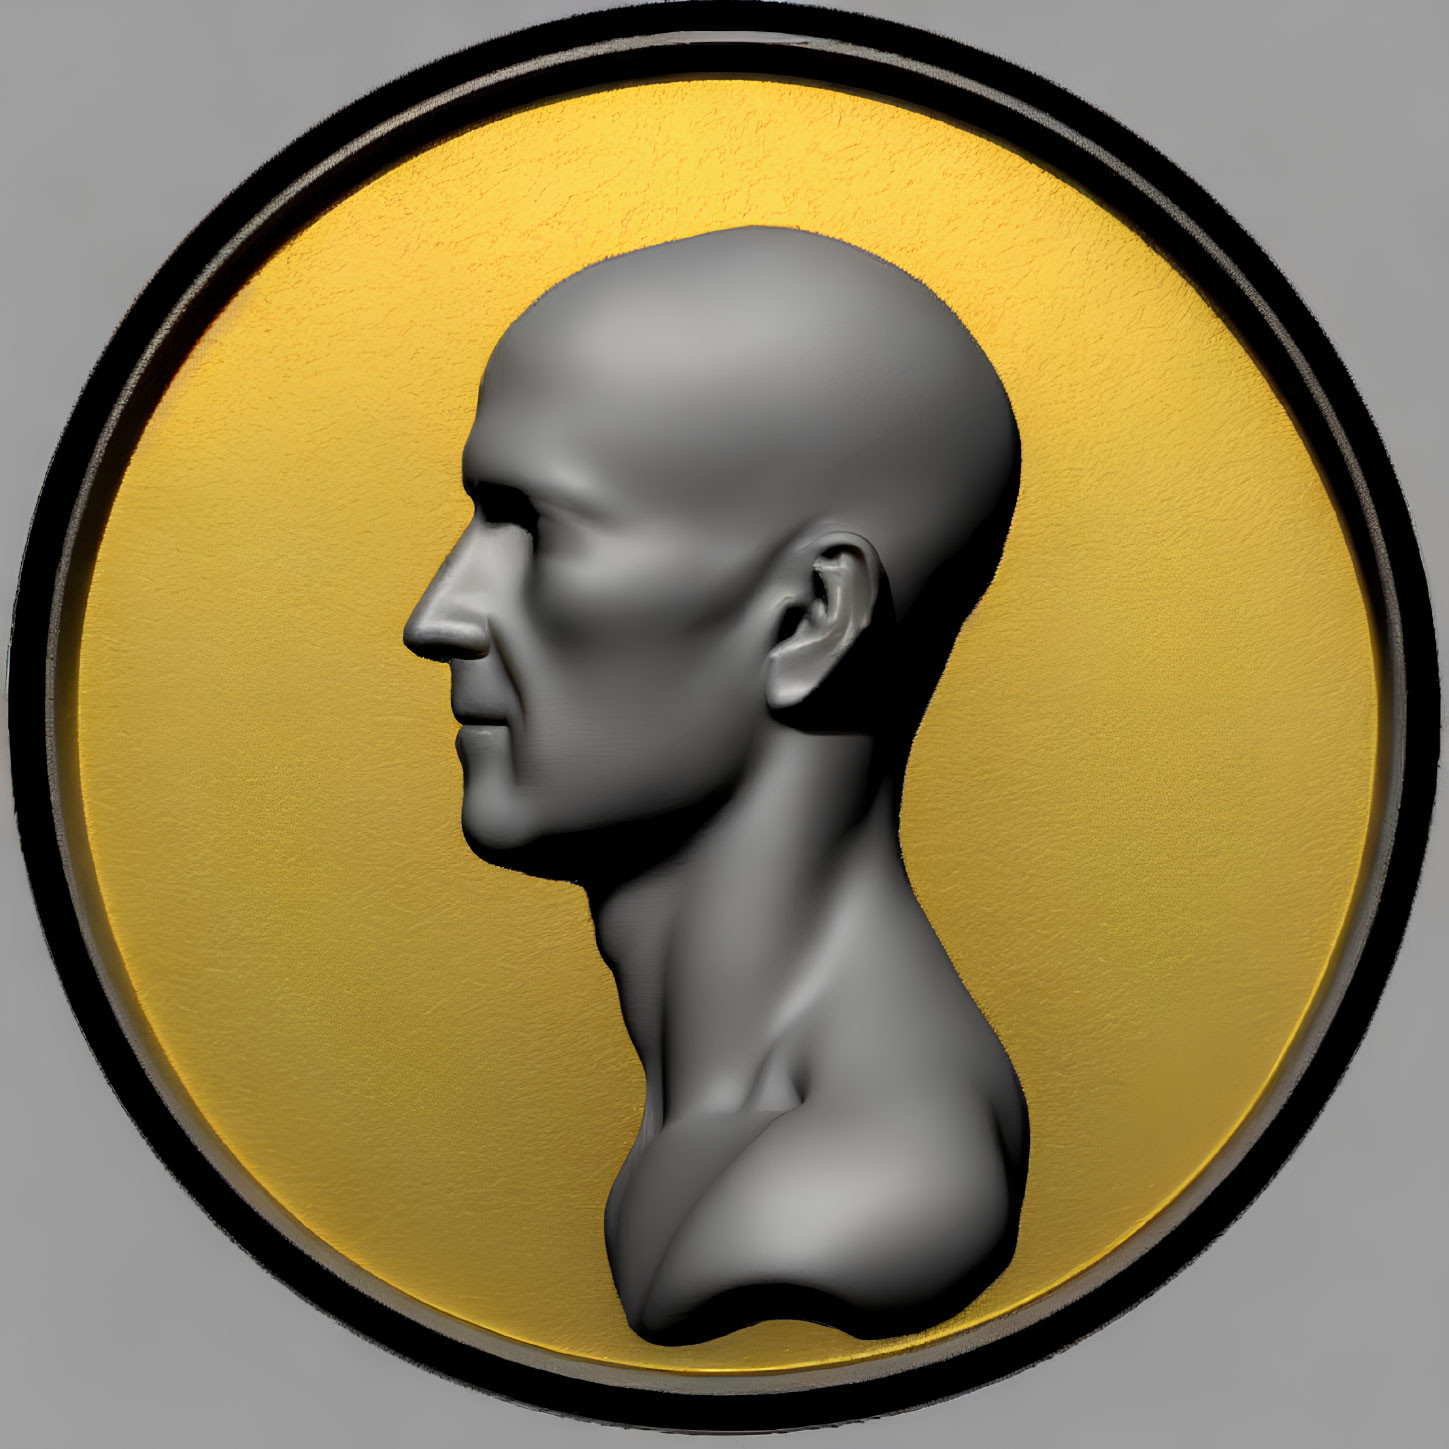 Bald Male Figure in Circular Frame on Gold Background